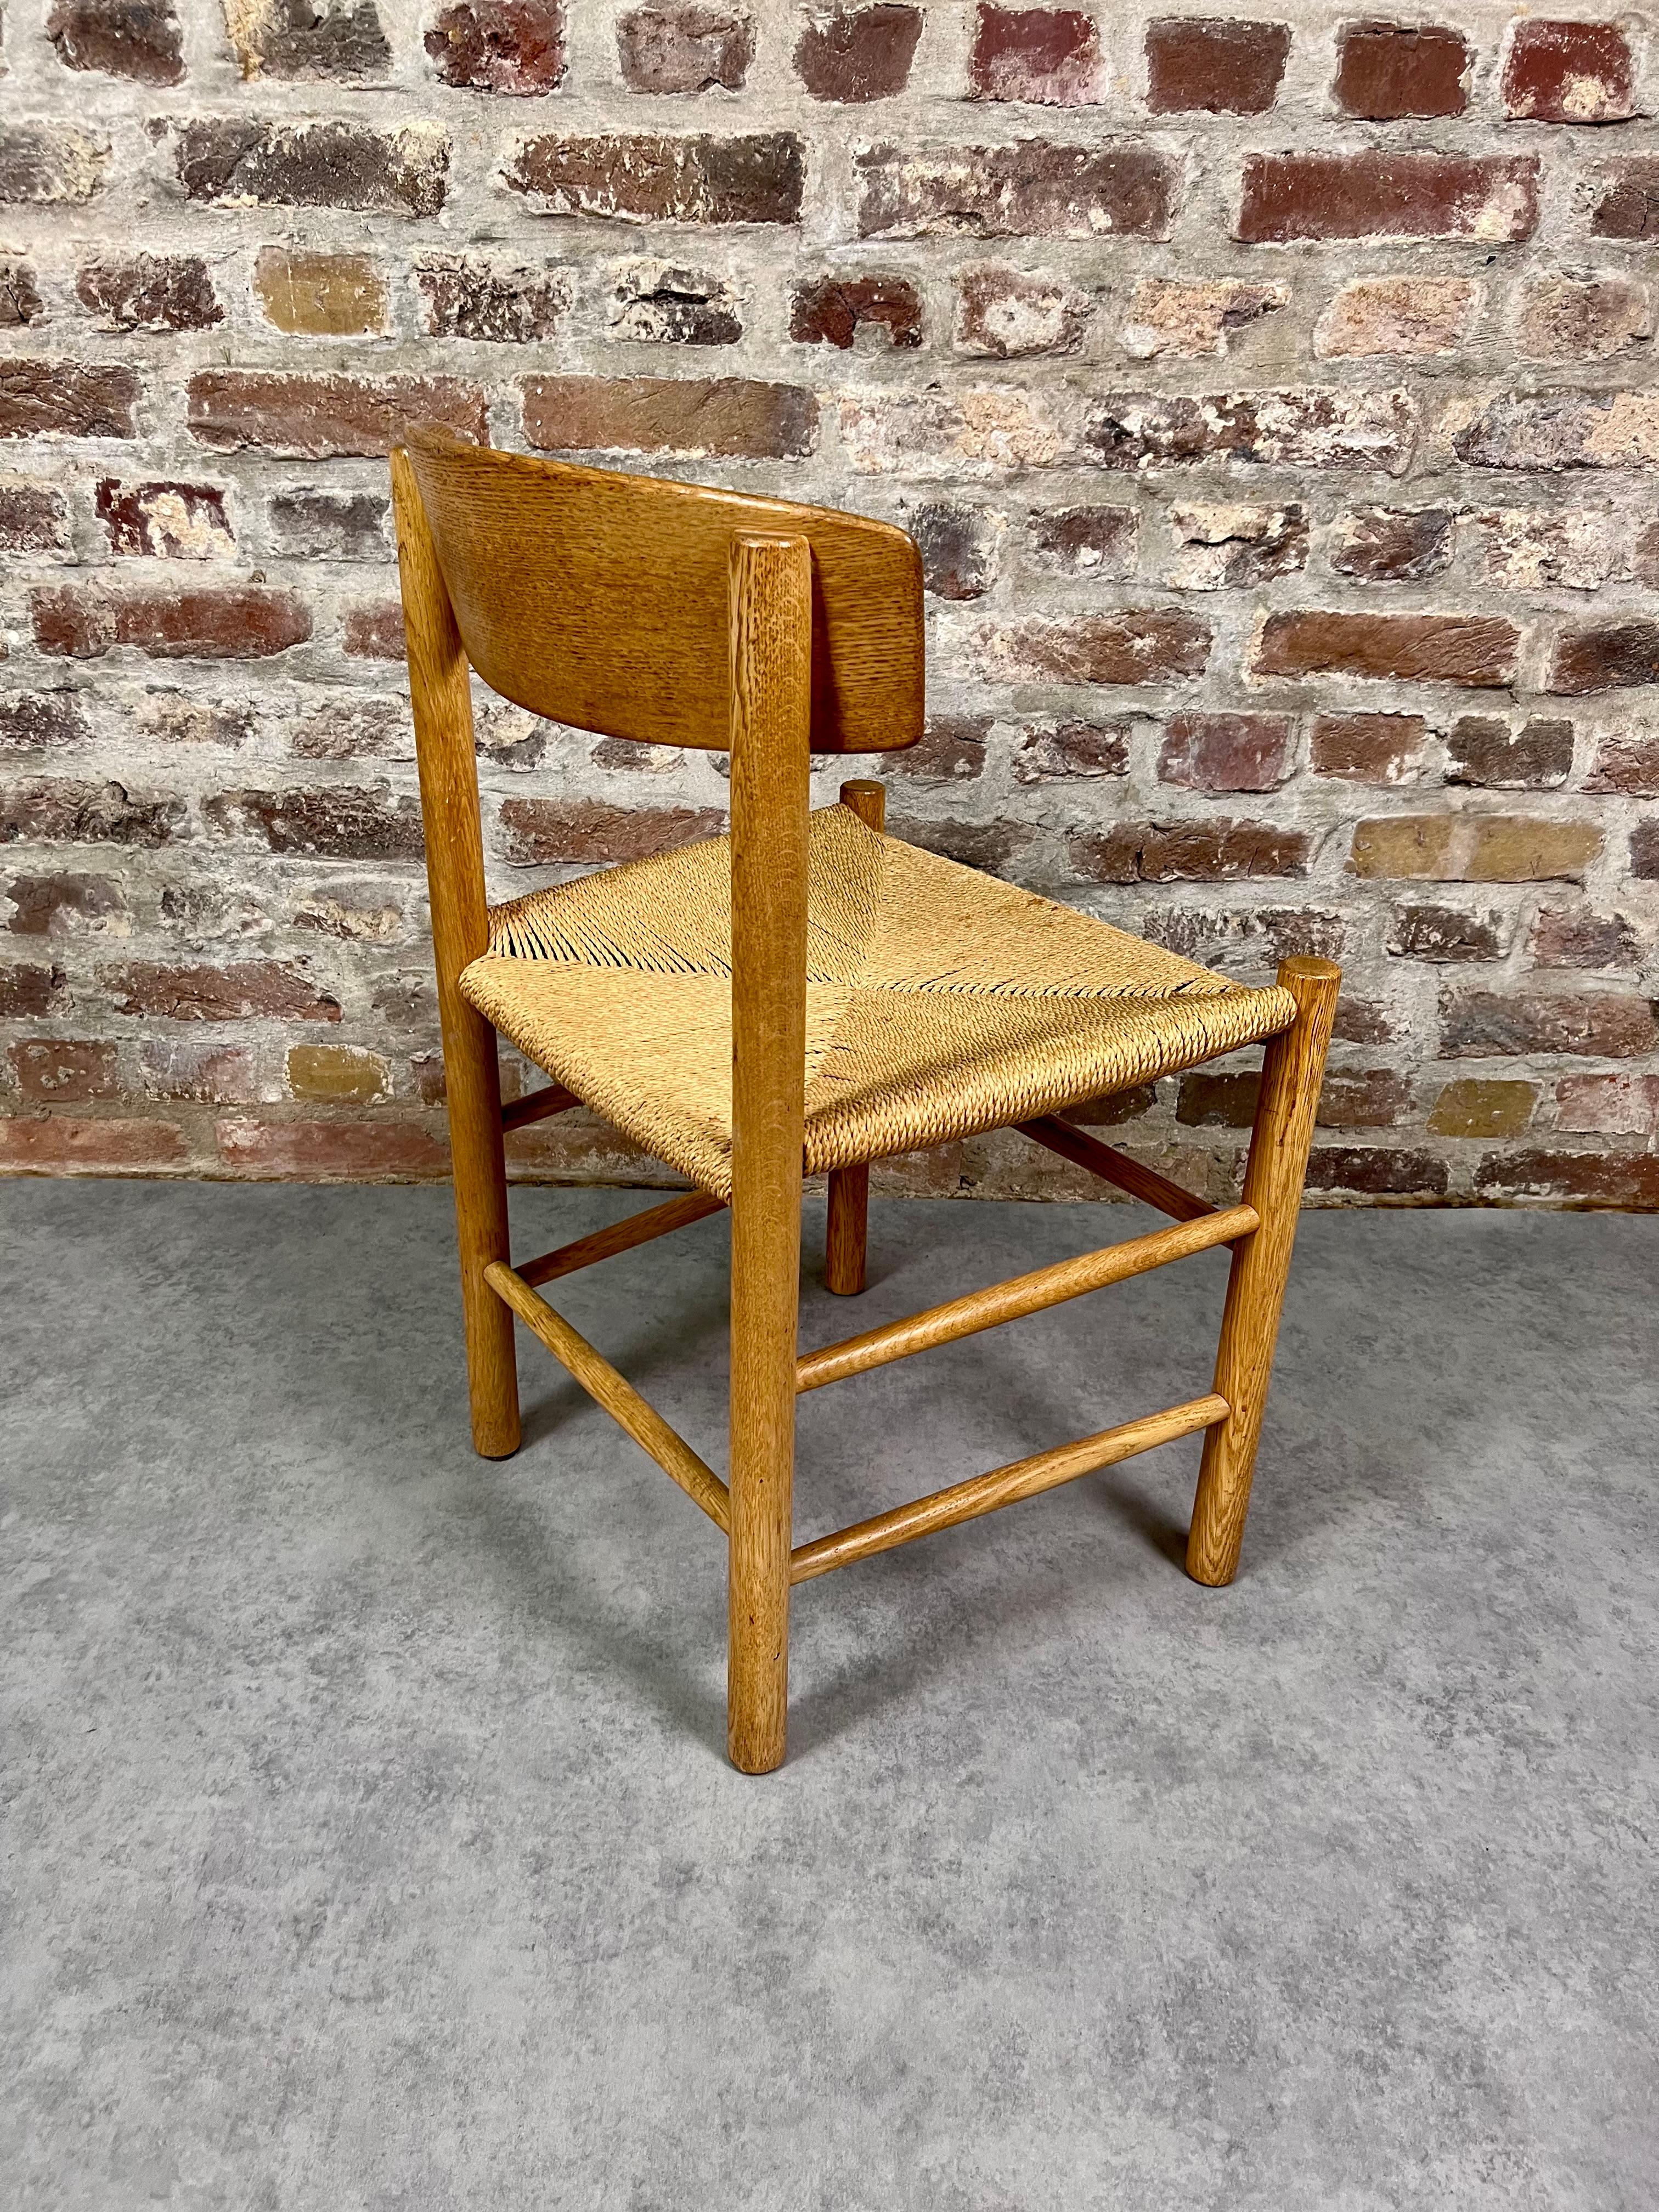 Beautiful set of dining chairs in light beech wood and paper cord. This is model J-39 by Borgen Mogensen. These chairs will fit perfectly in a mid-century modern interior. The craftsmanship and details on these chairs are beautiful and will be a